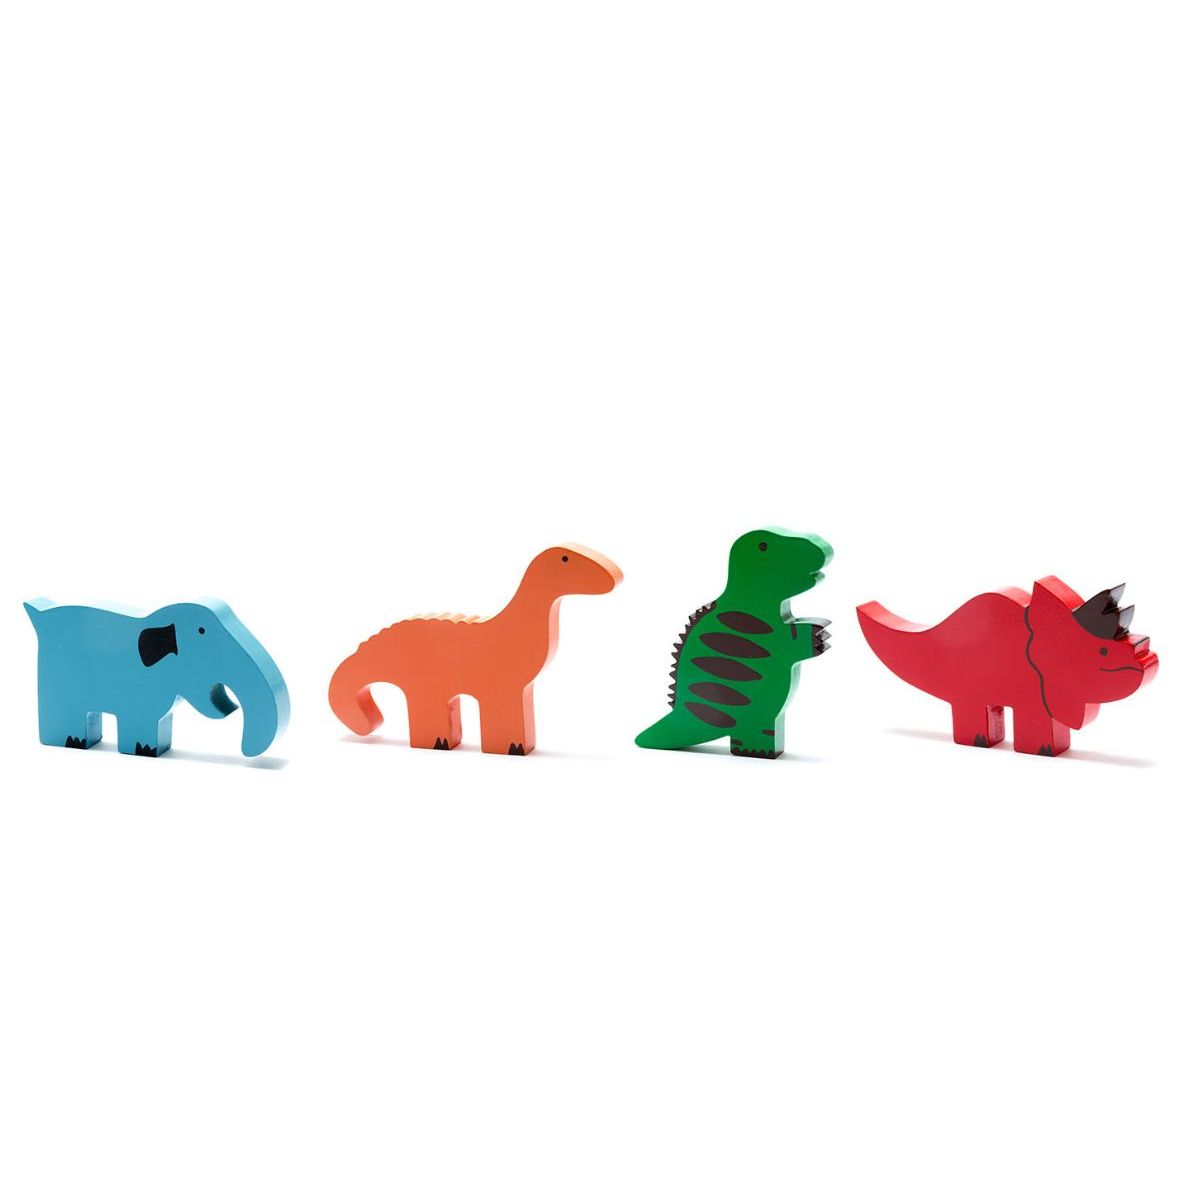 Load image into Gallery viewer, The four available wooden toys from Best Years. From left to right, a blue mammoth, an orange diplodocus, a green t. rex and a red triceratops.
